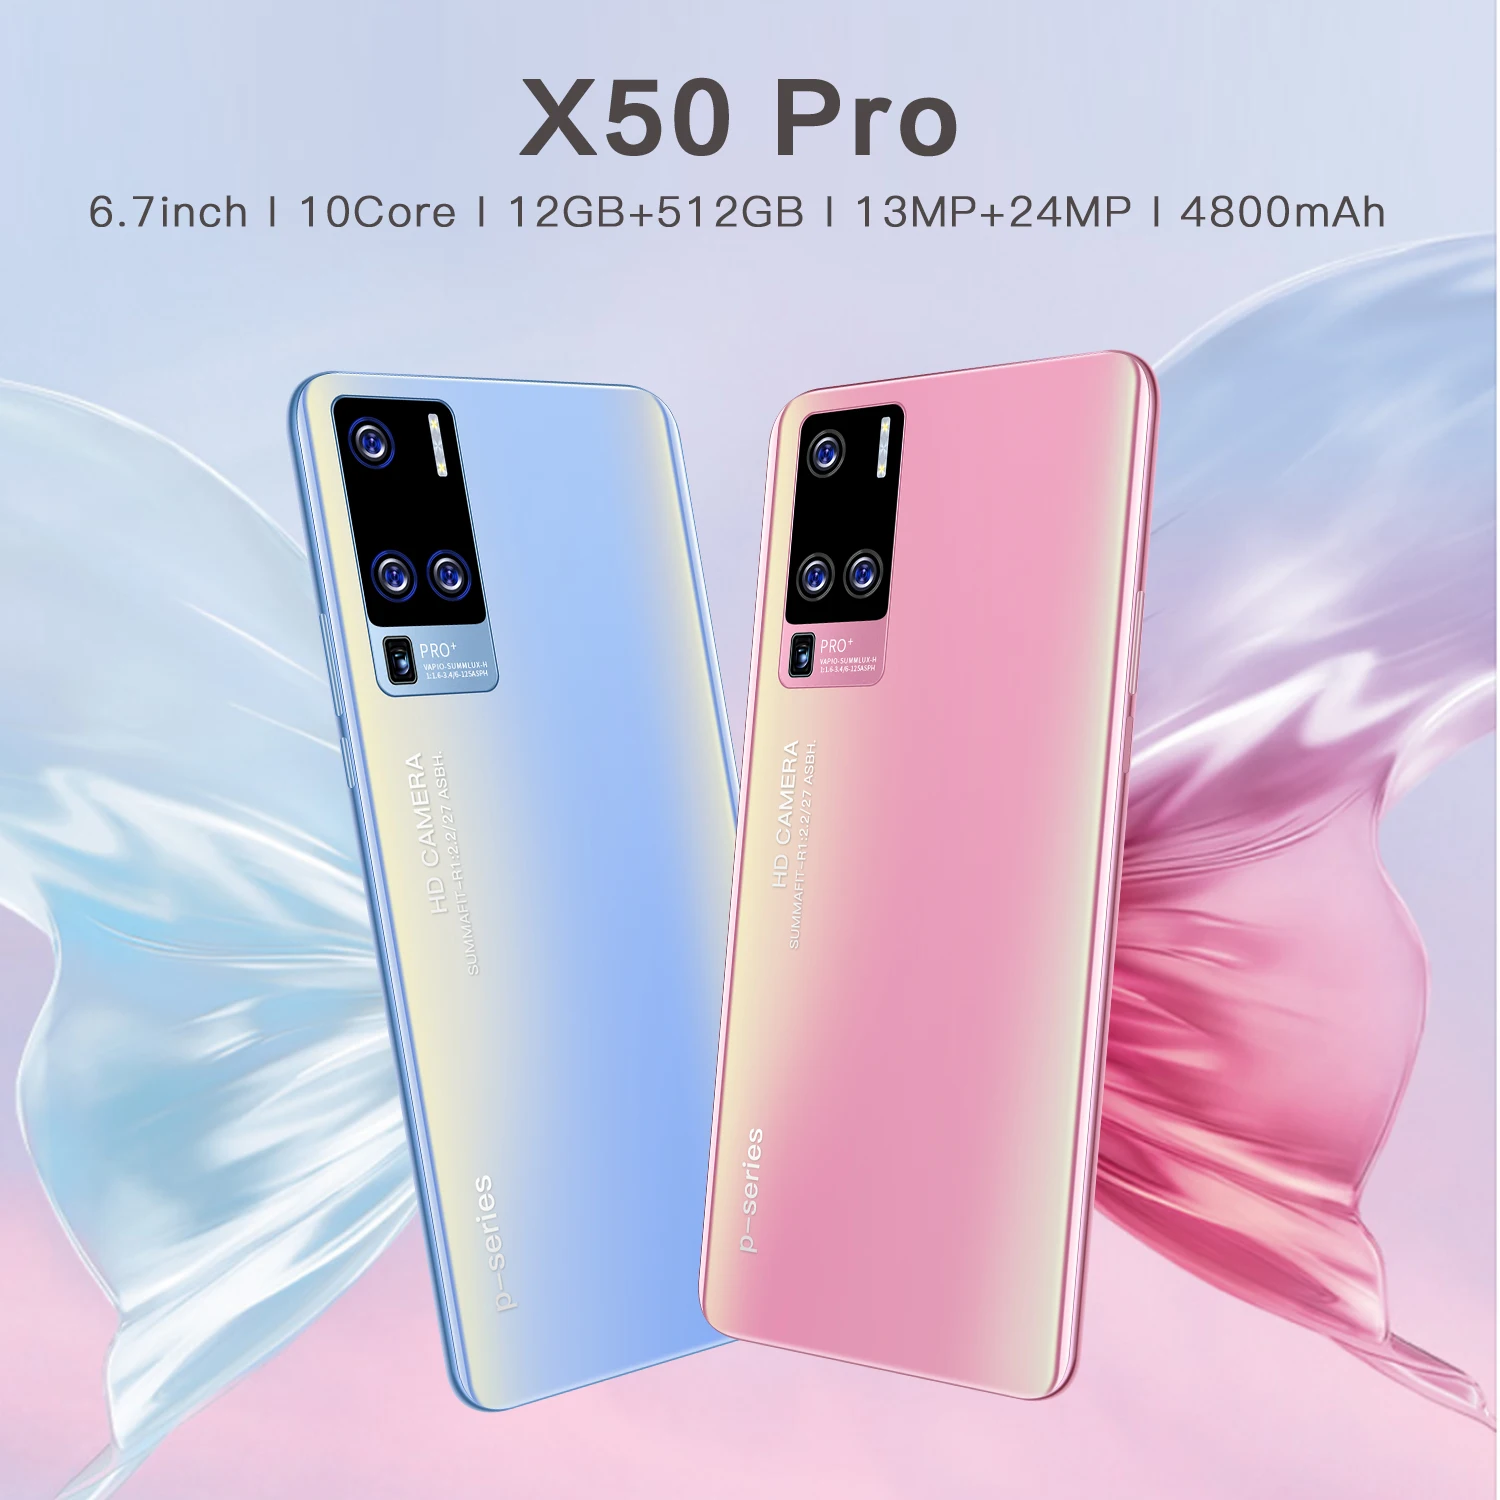 

X50 Pro 12GB+512GB 6.7 inch 4800mAh Android 10.0 Cheap Unlocked Cell Phone Low Price Smart Mobile Phones 4G Android Smartphone, Blue/pink/black